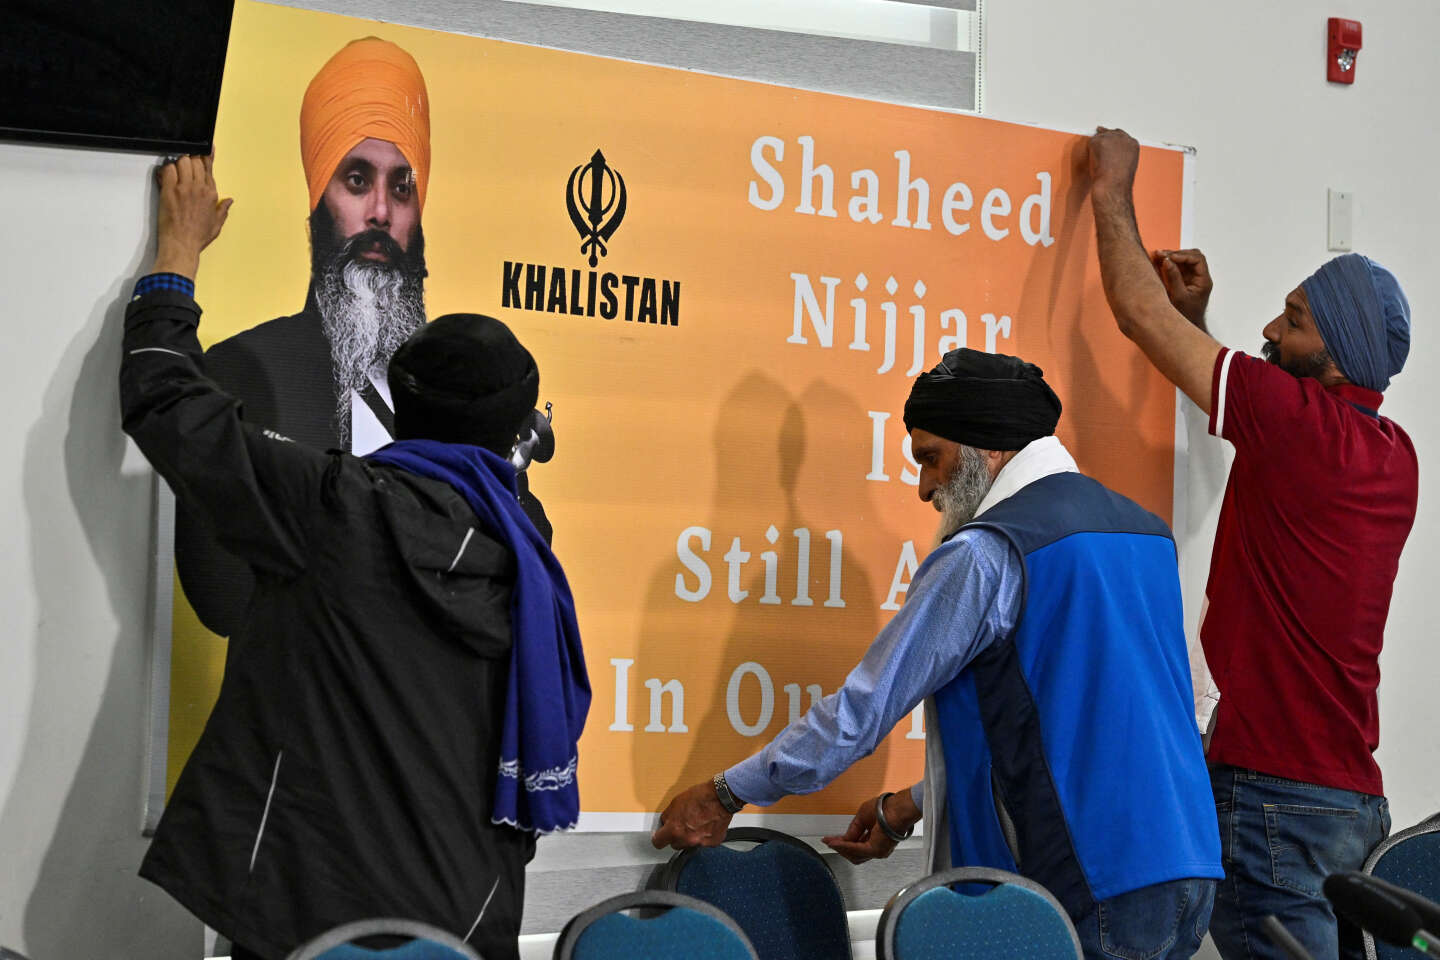 In Canada, three Indians have been arrested in connection with the assassination of a Sikh leader